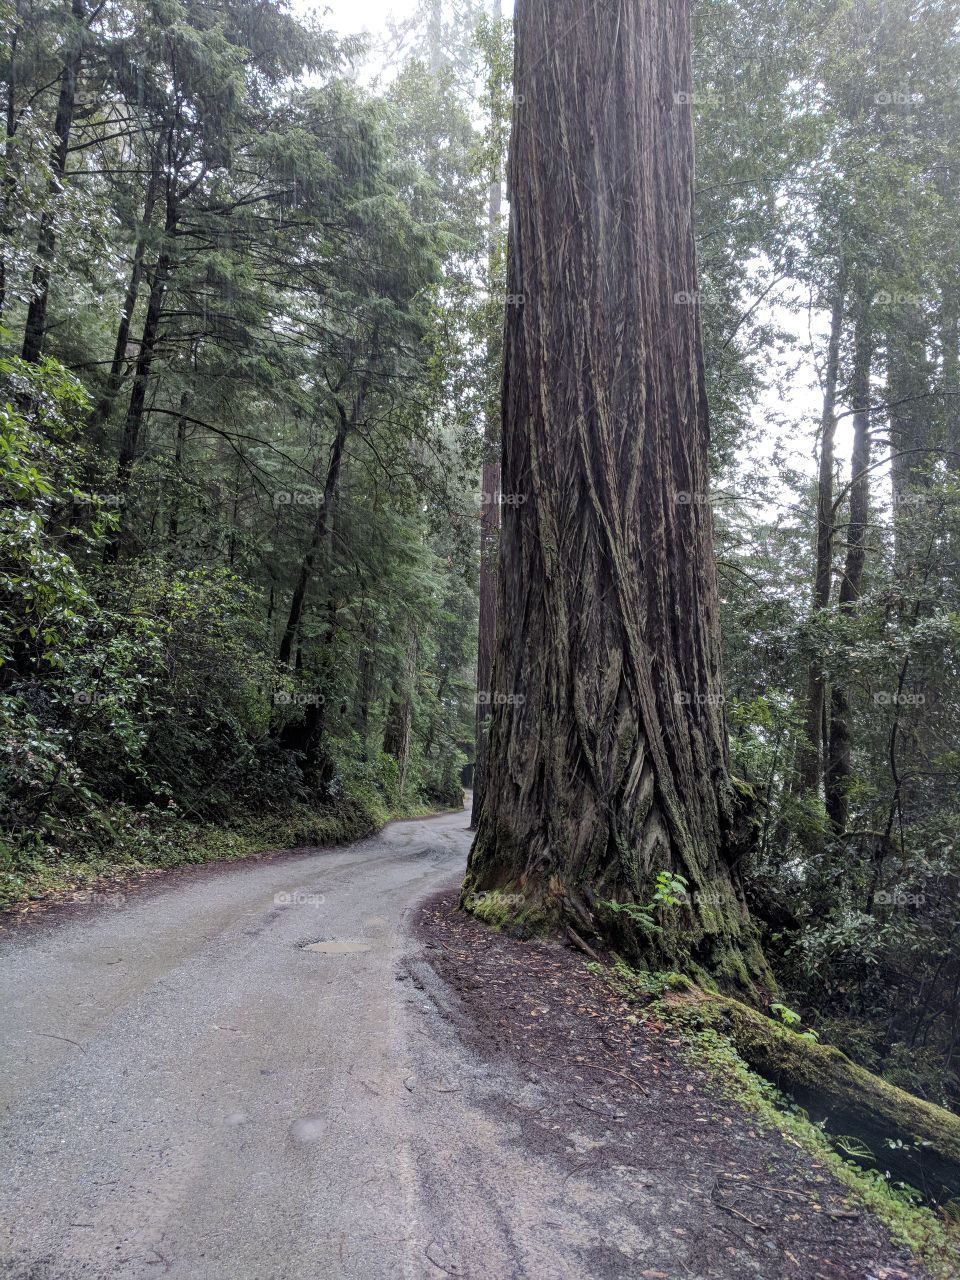 Magnificent, Redwood Forest in California on the coast.